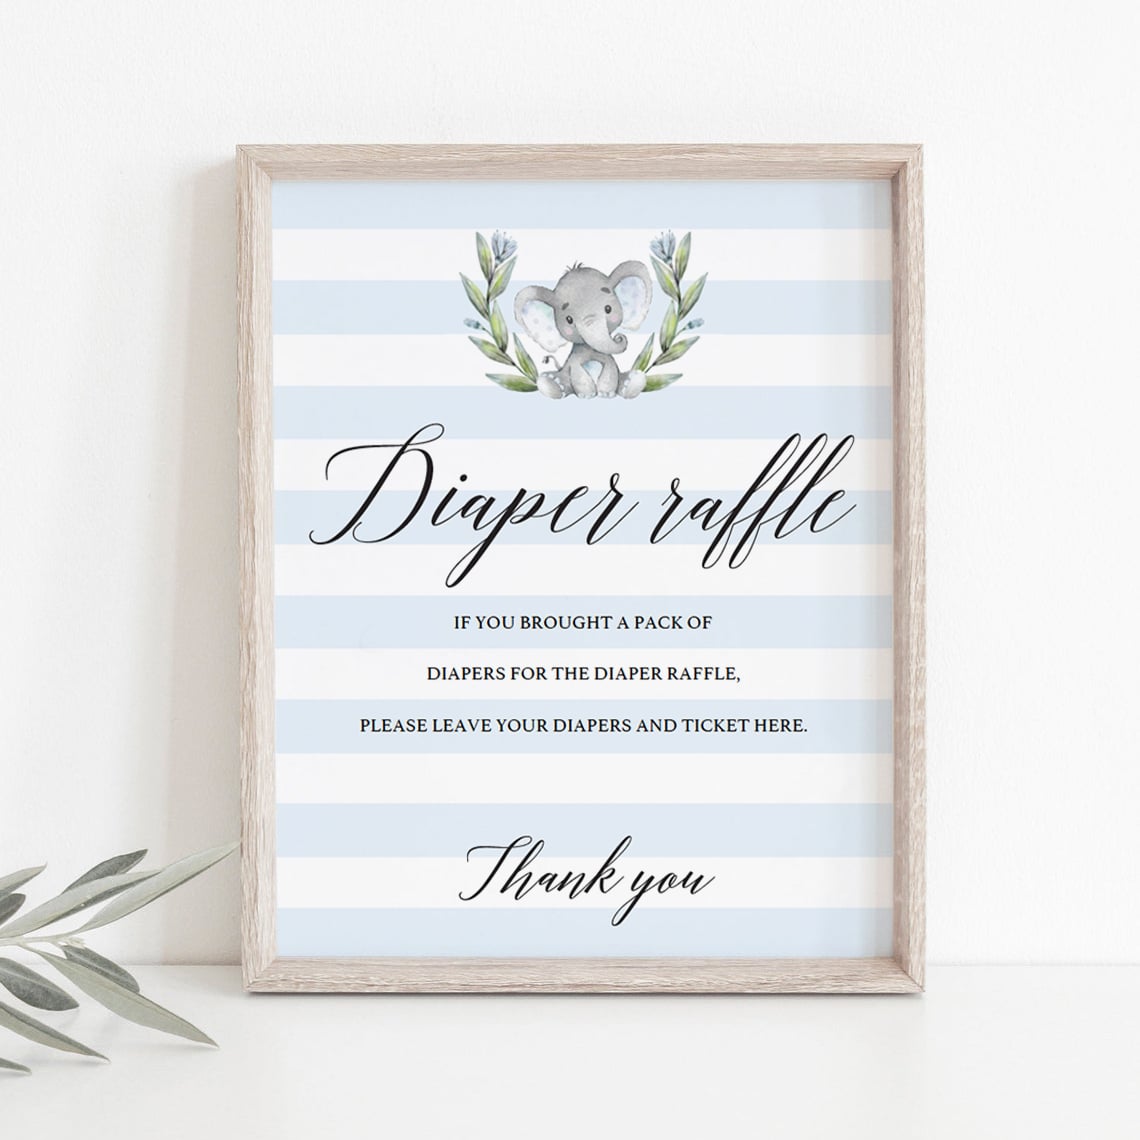 Elephant shower Diaper raffle sign download PDF by LittleSizzle